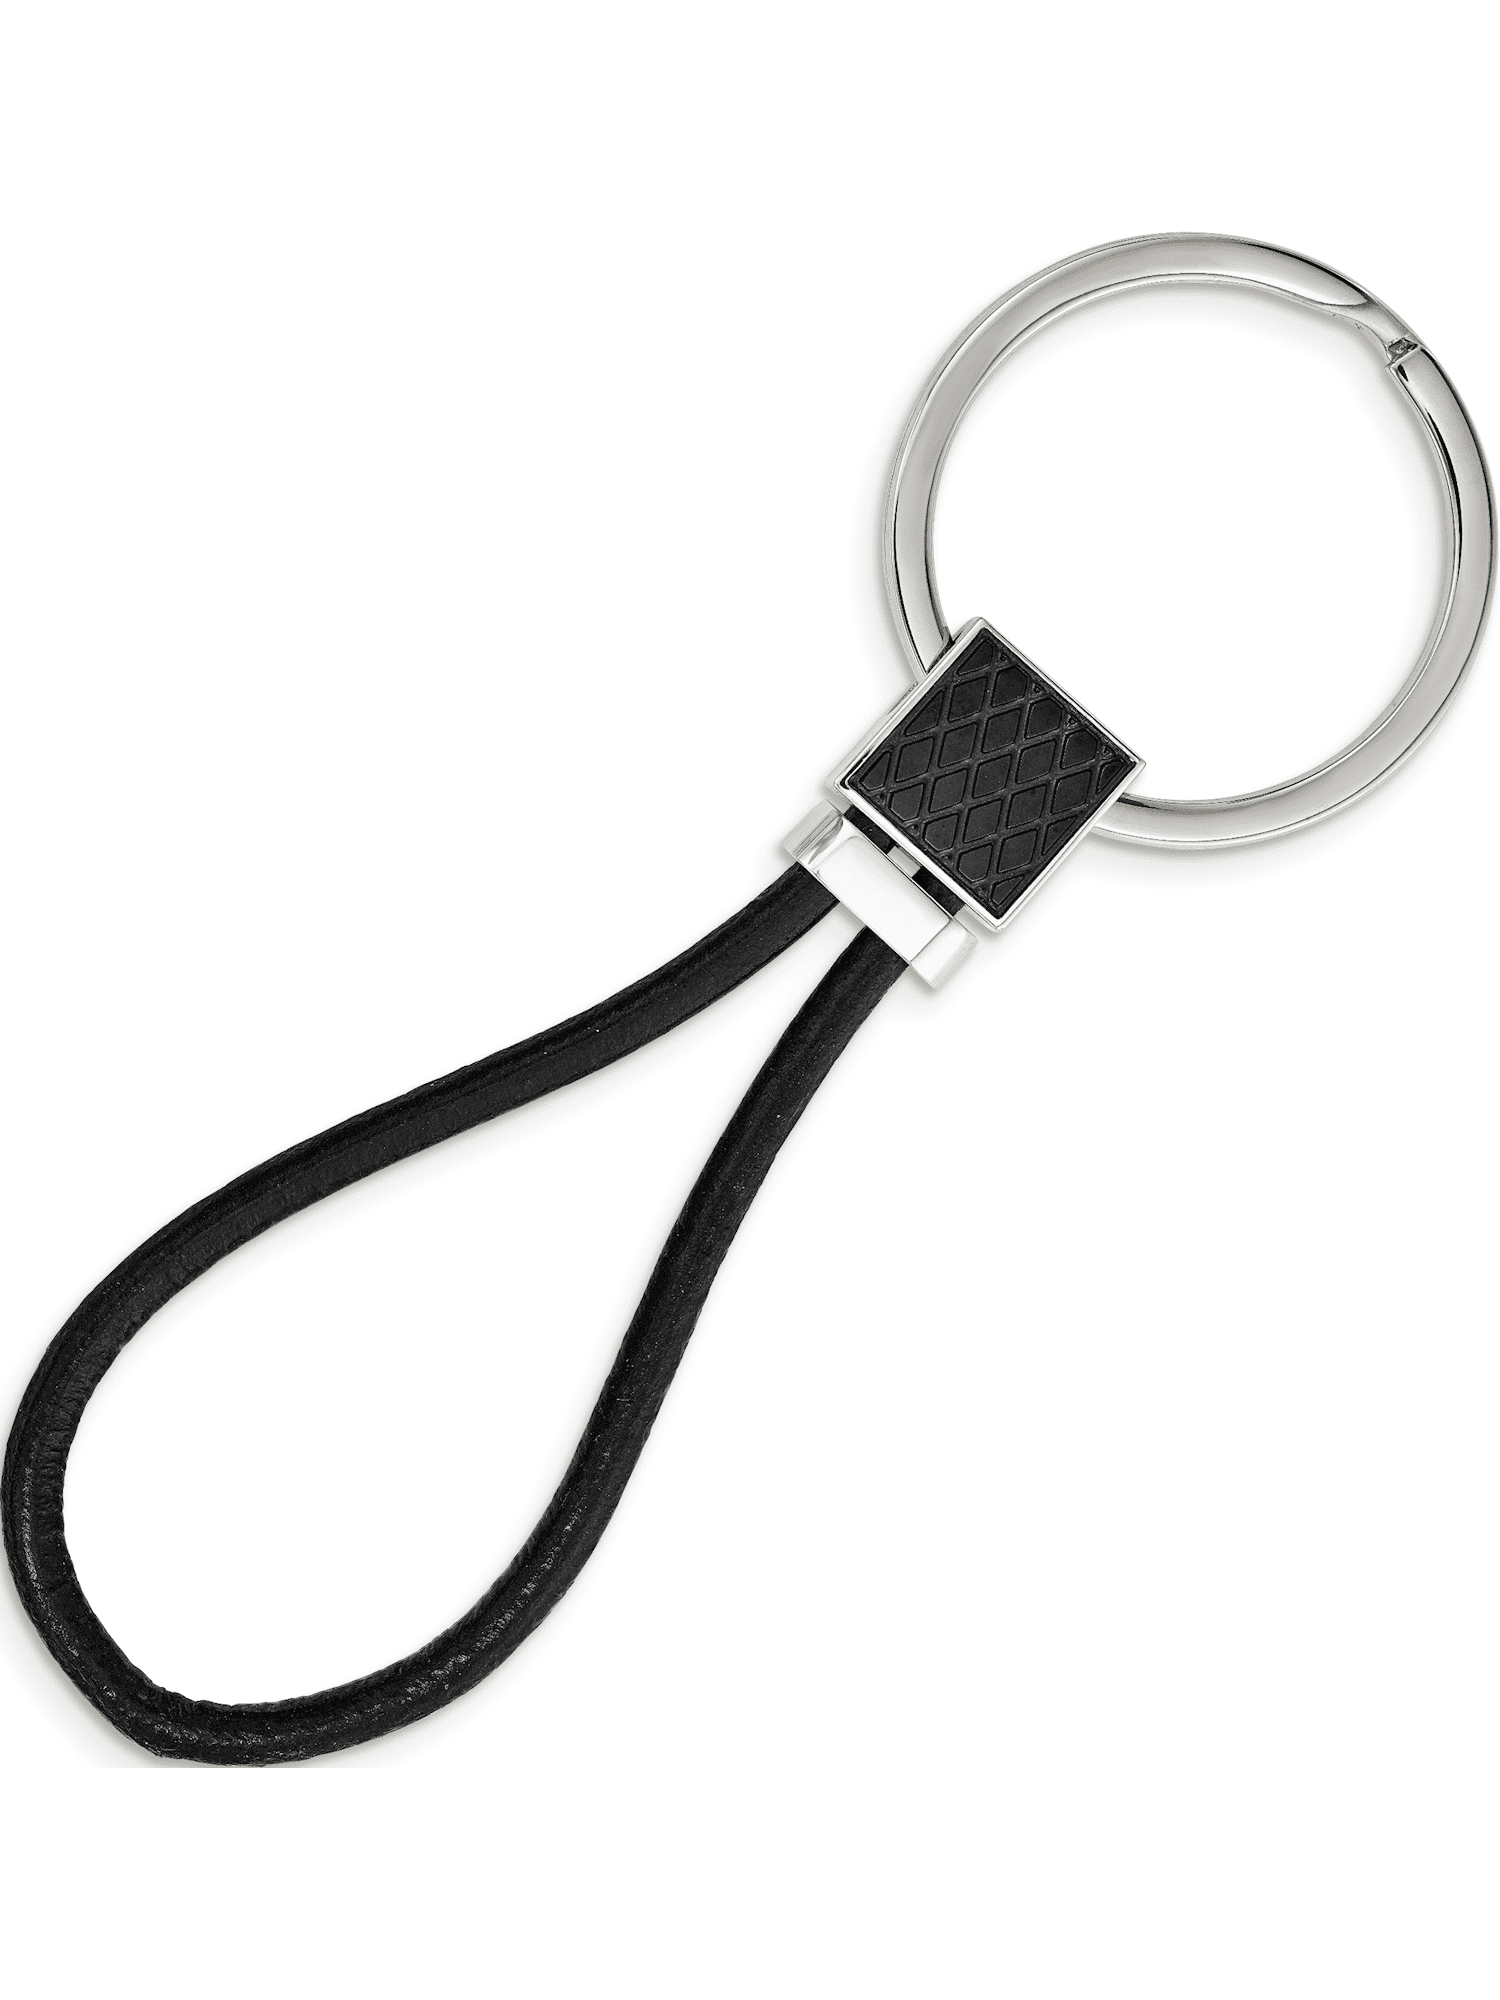 Sweet Pea Image Black Leather Keyring in Gift Box